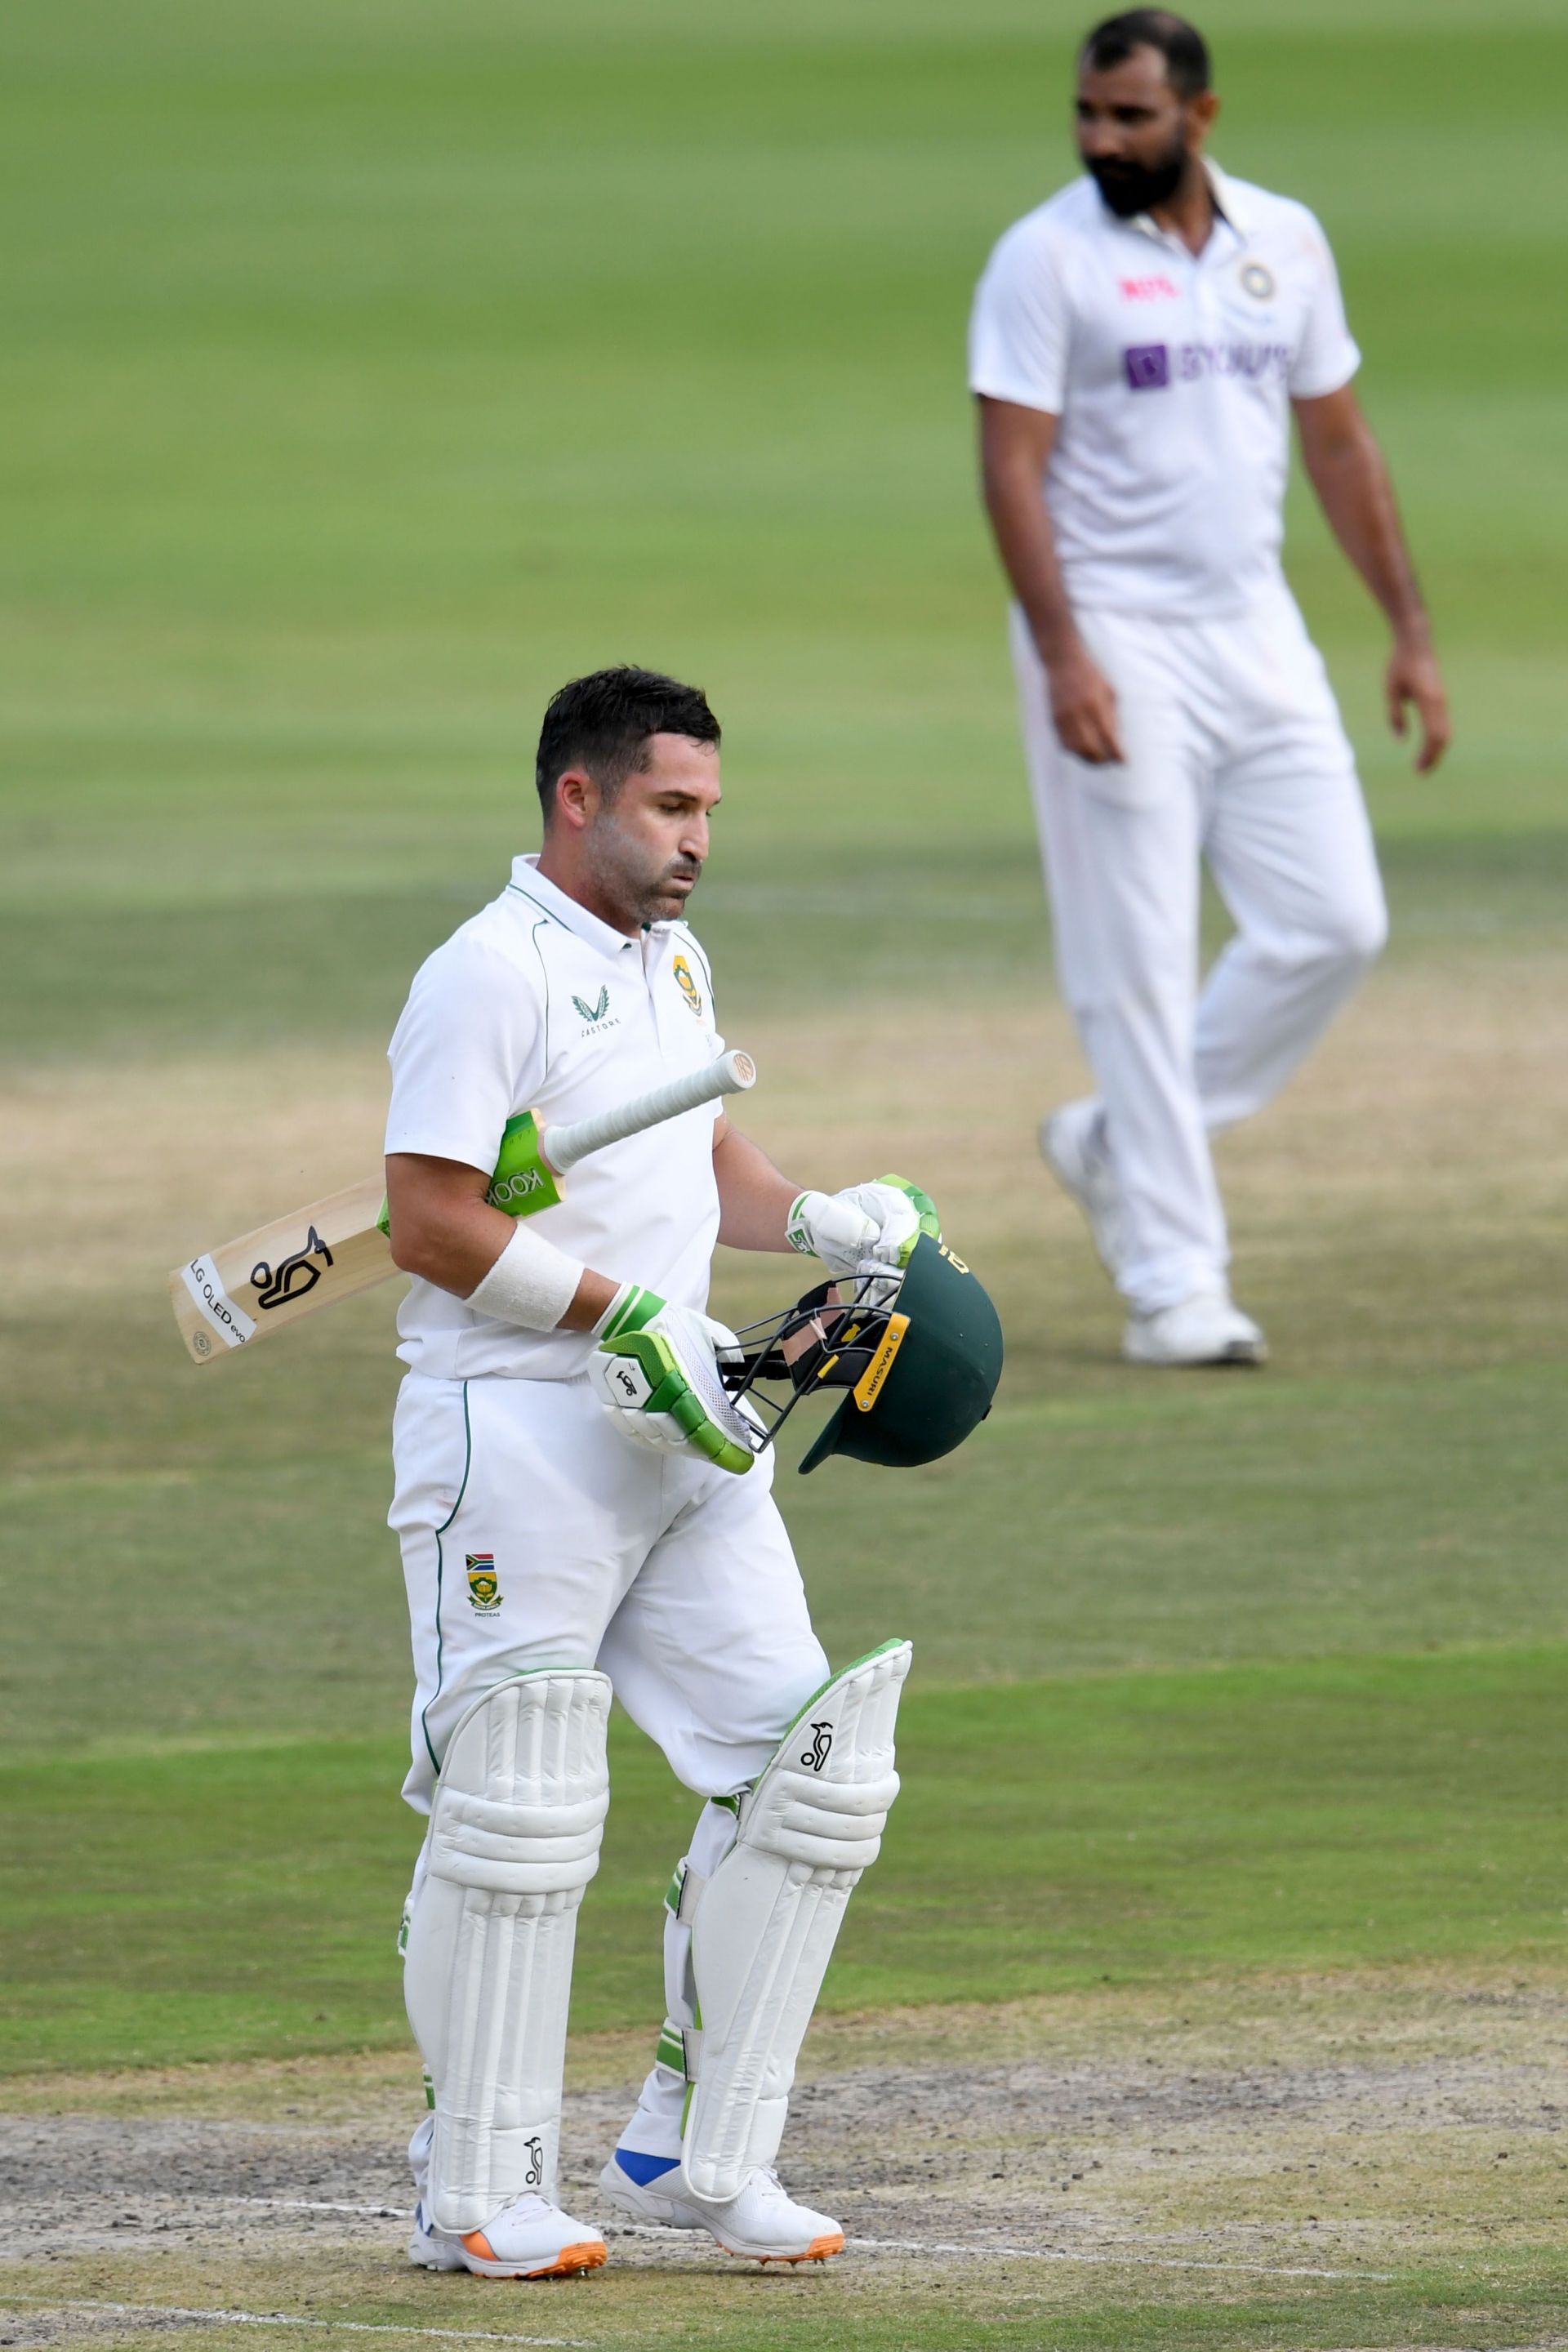 Dean Elgar led his side to a memorable victory in the second Test match against India.